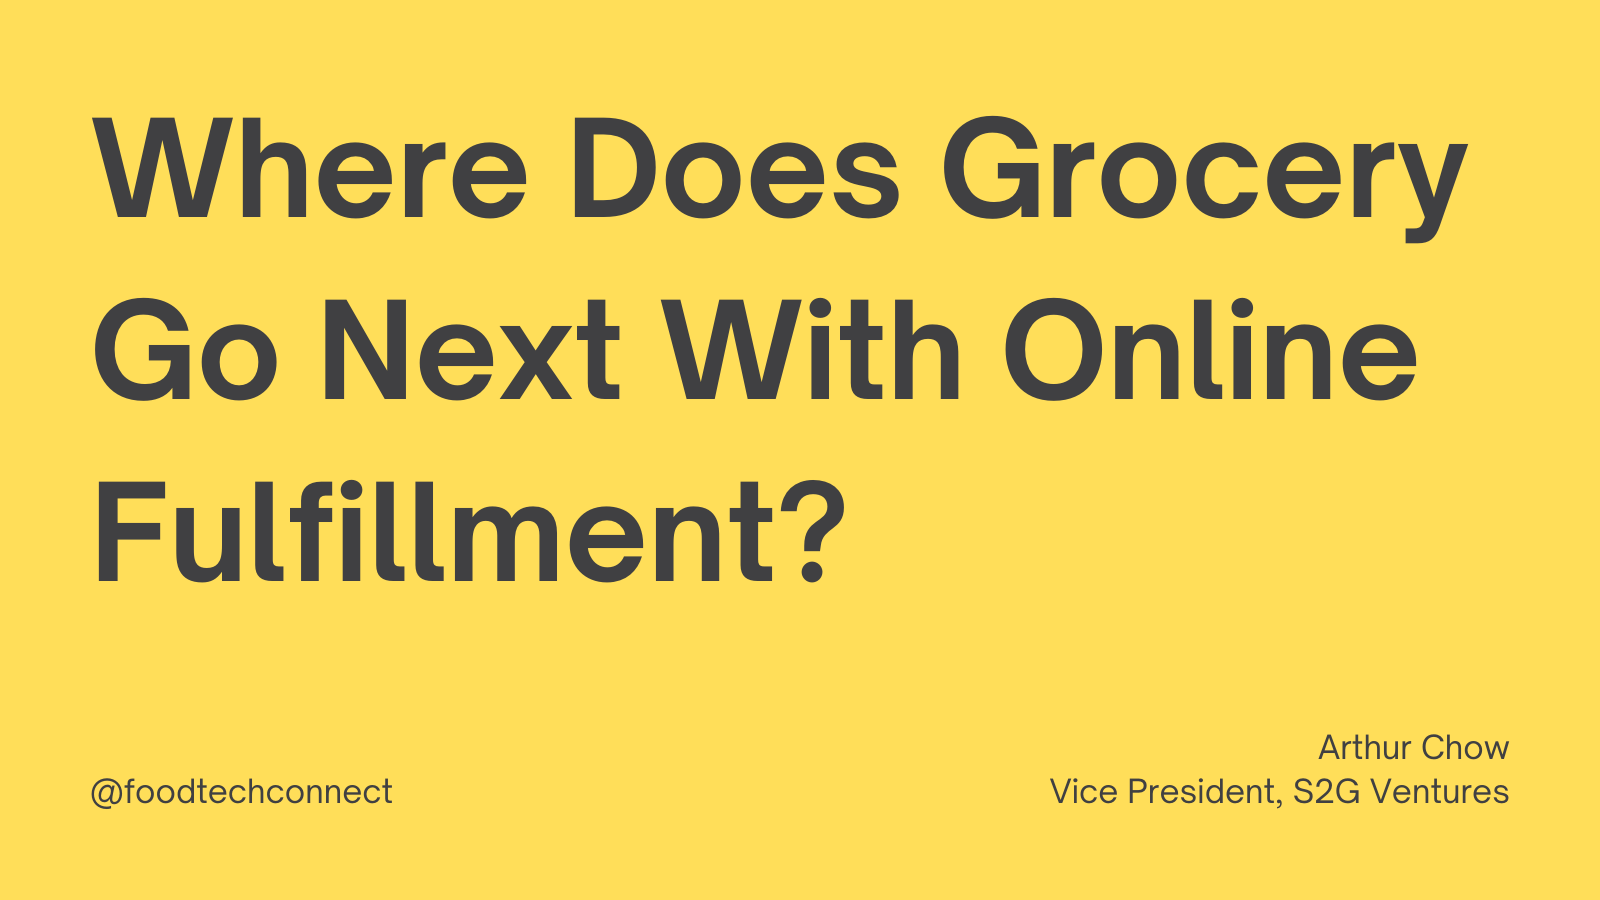 Where Does Grocery Go Next with Online Fulfillment?